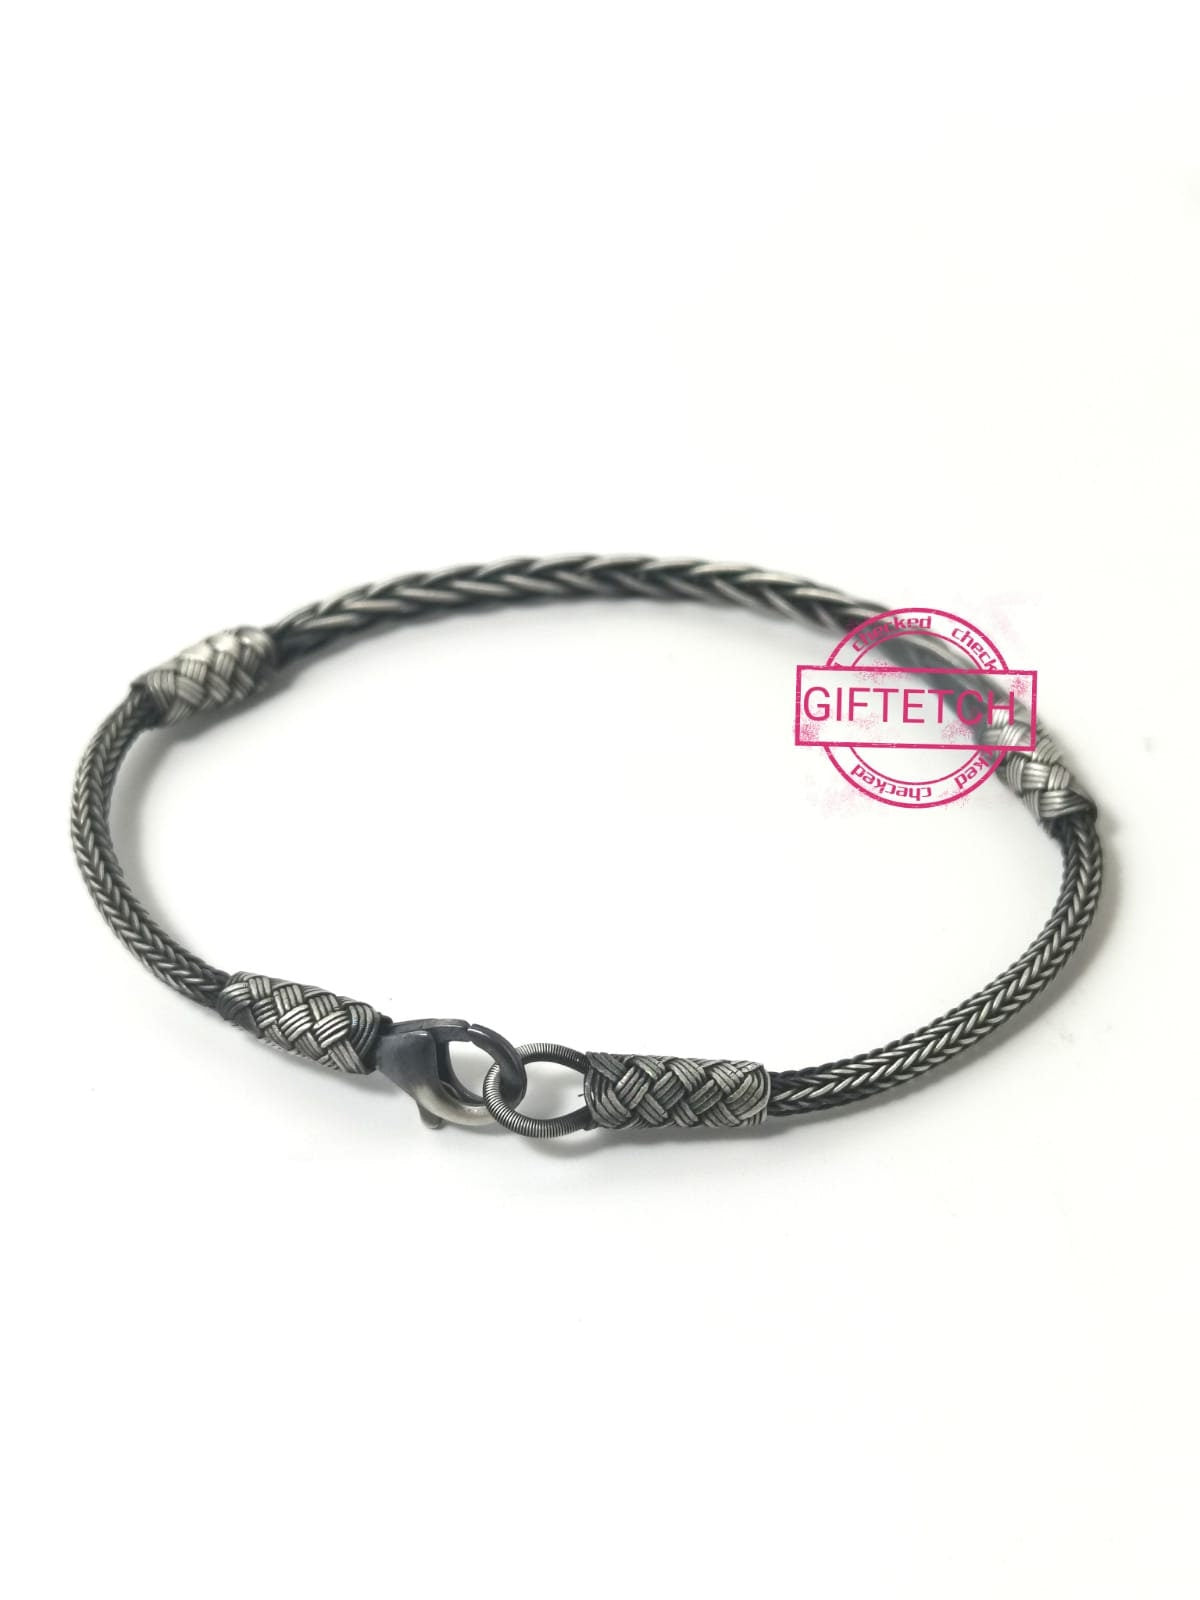 Oxidised Silver Ancient Turkish Classic Kazaz Handwoven Braided Bracelet by Giftetch